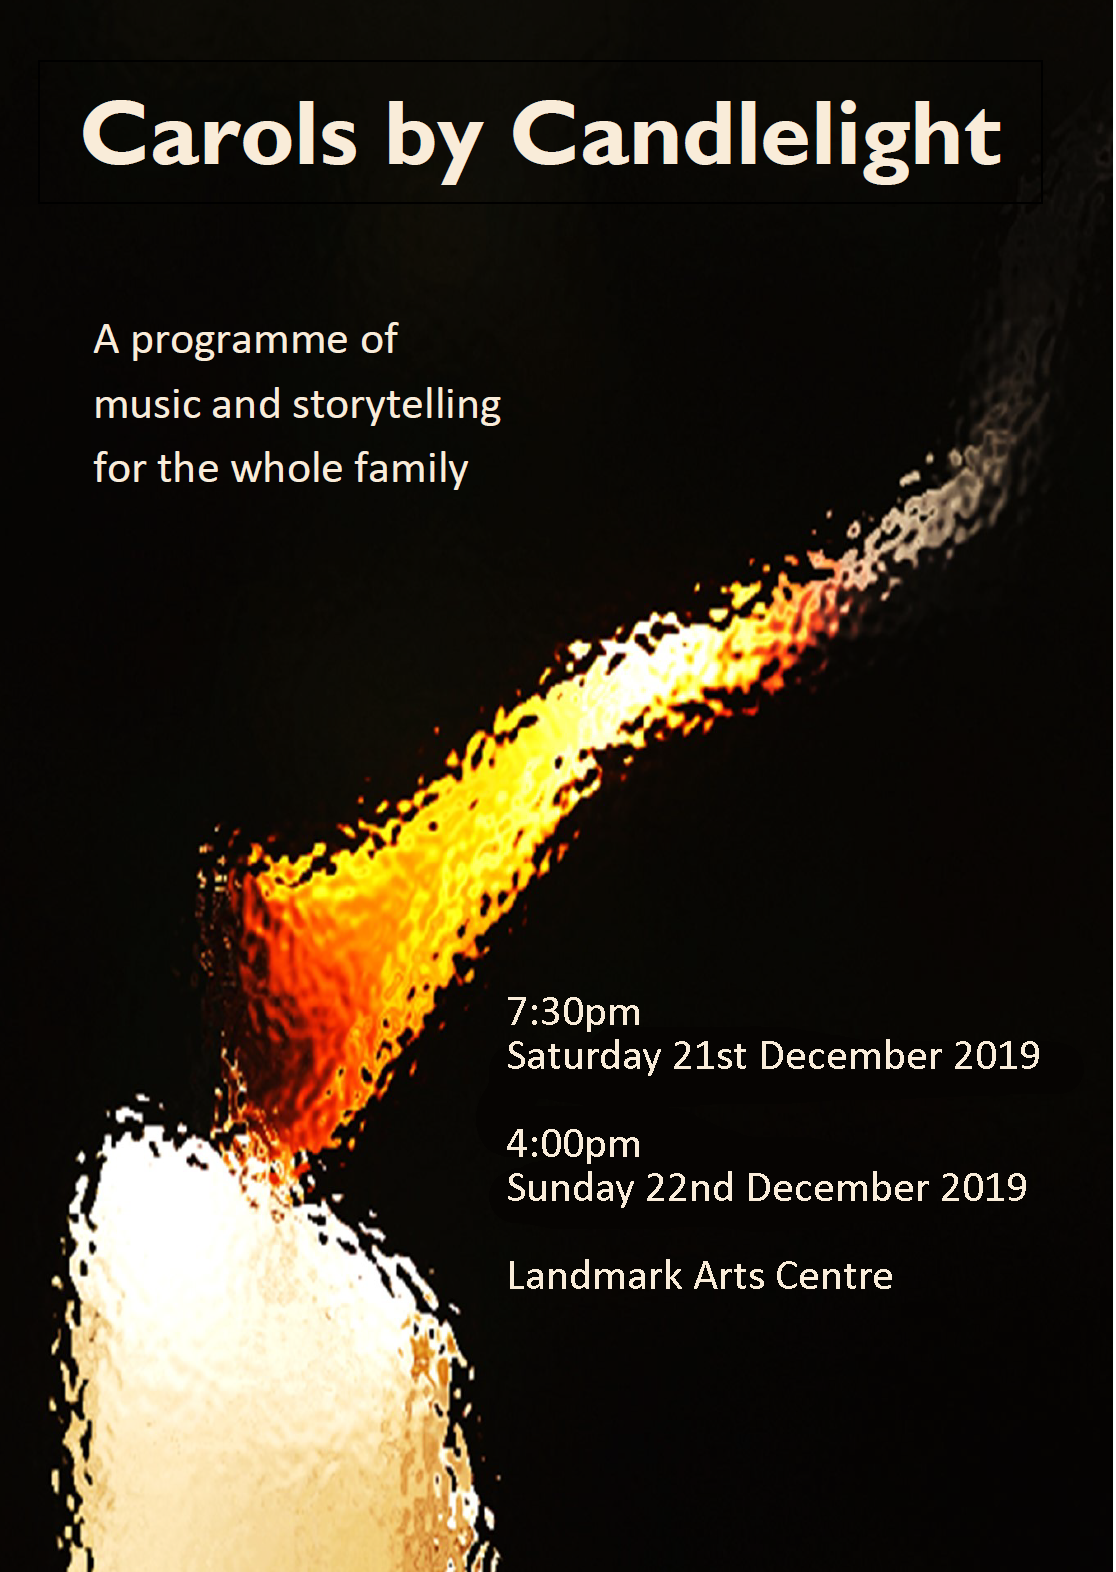 Carols By Candlelight 2019 Saturday Programme